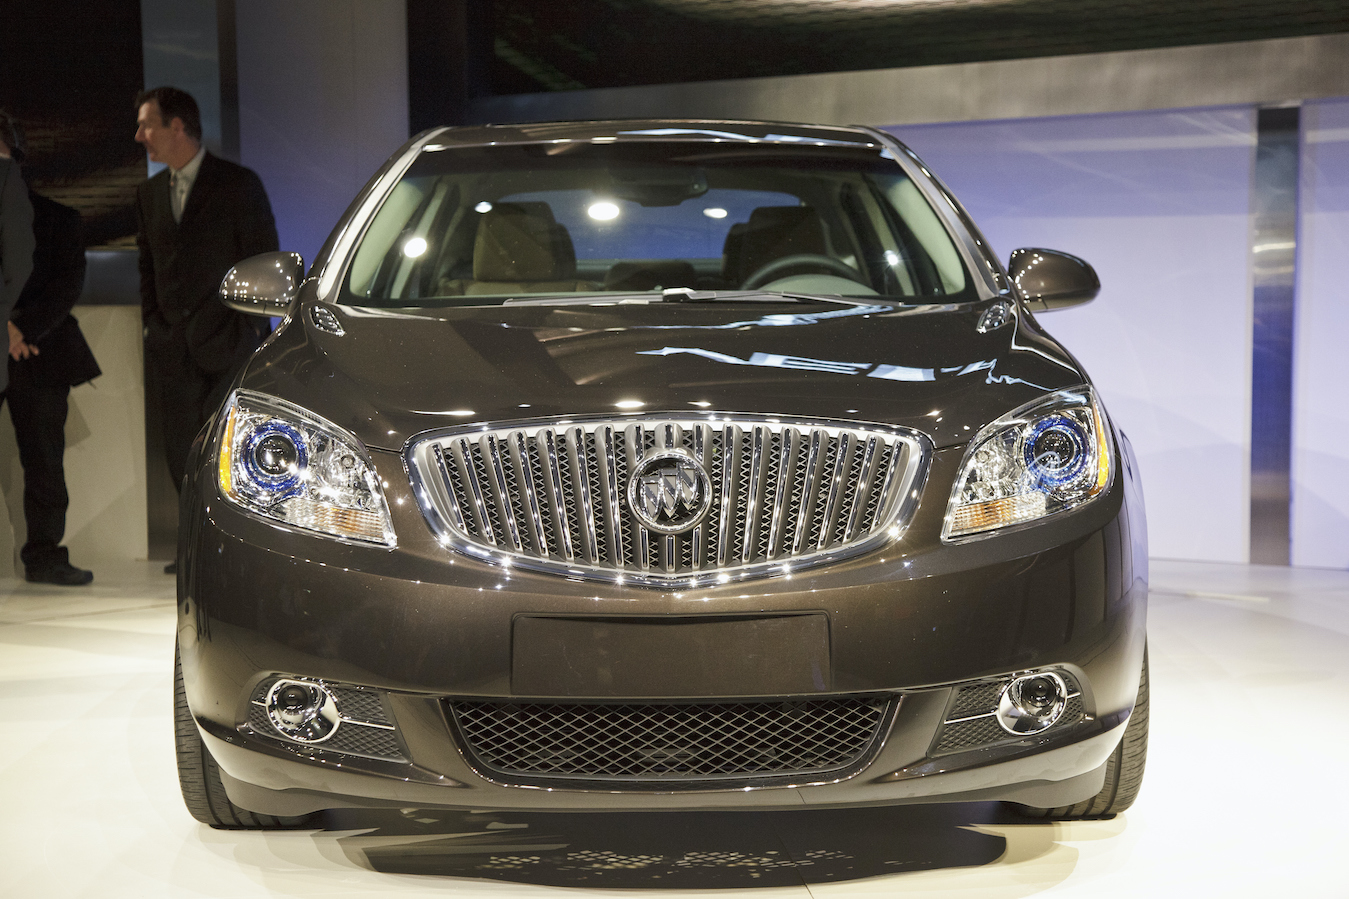 The Buick Verano being unveiled at a press event at the 2011 North American International Auto Show